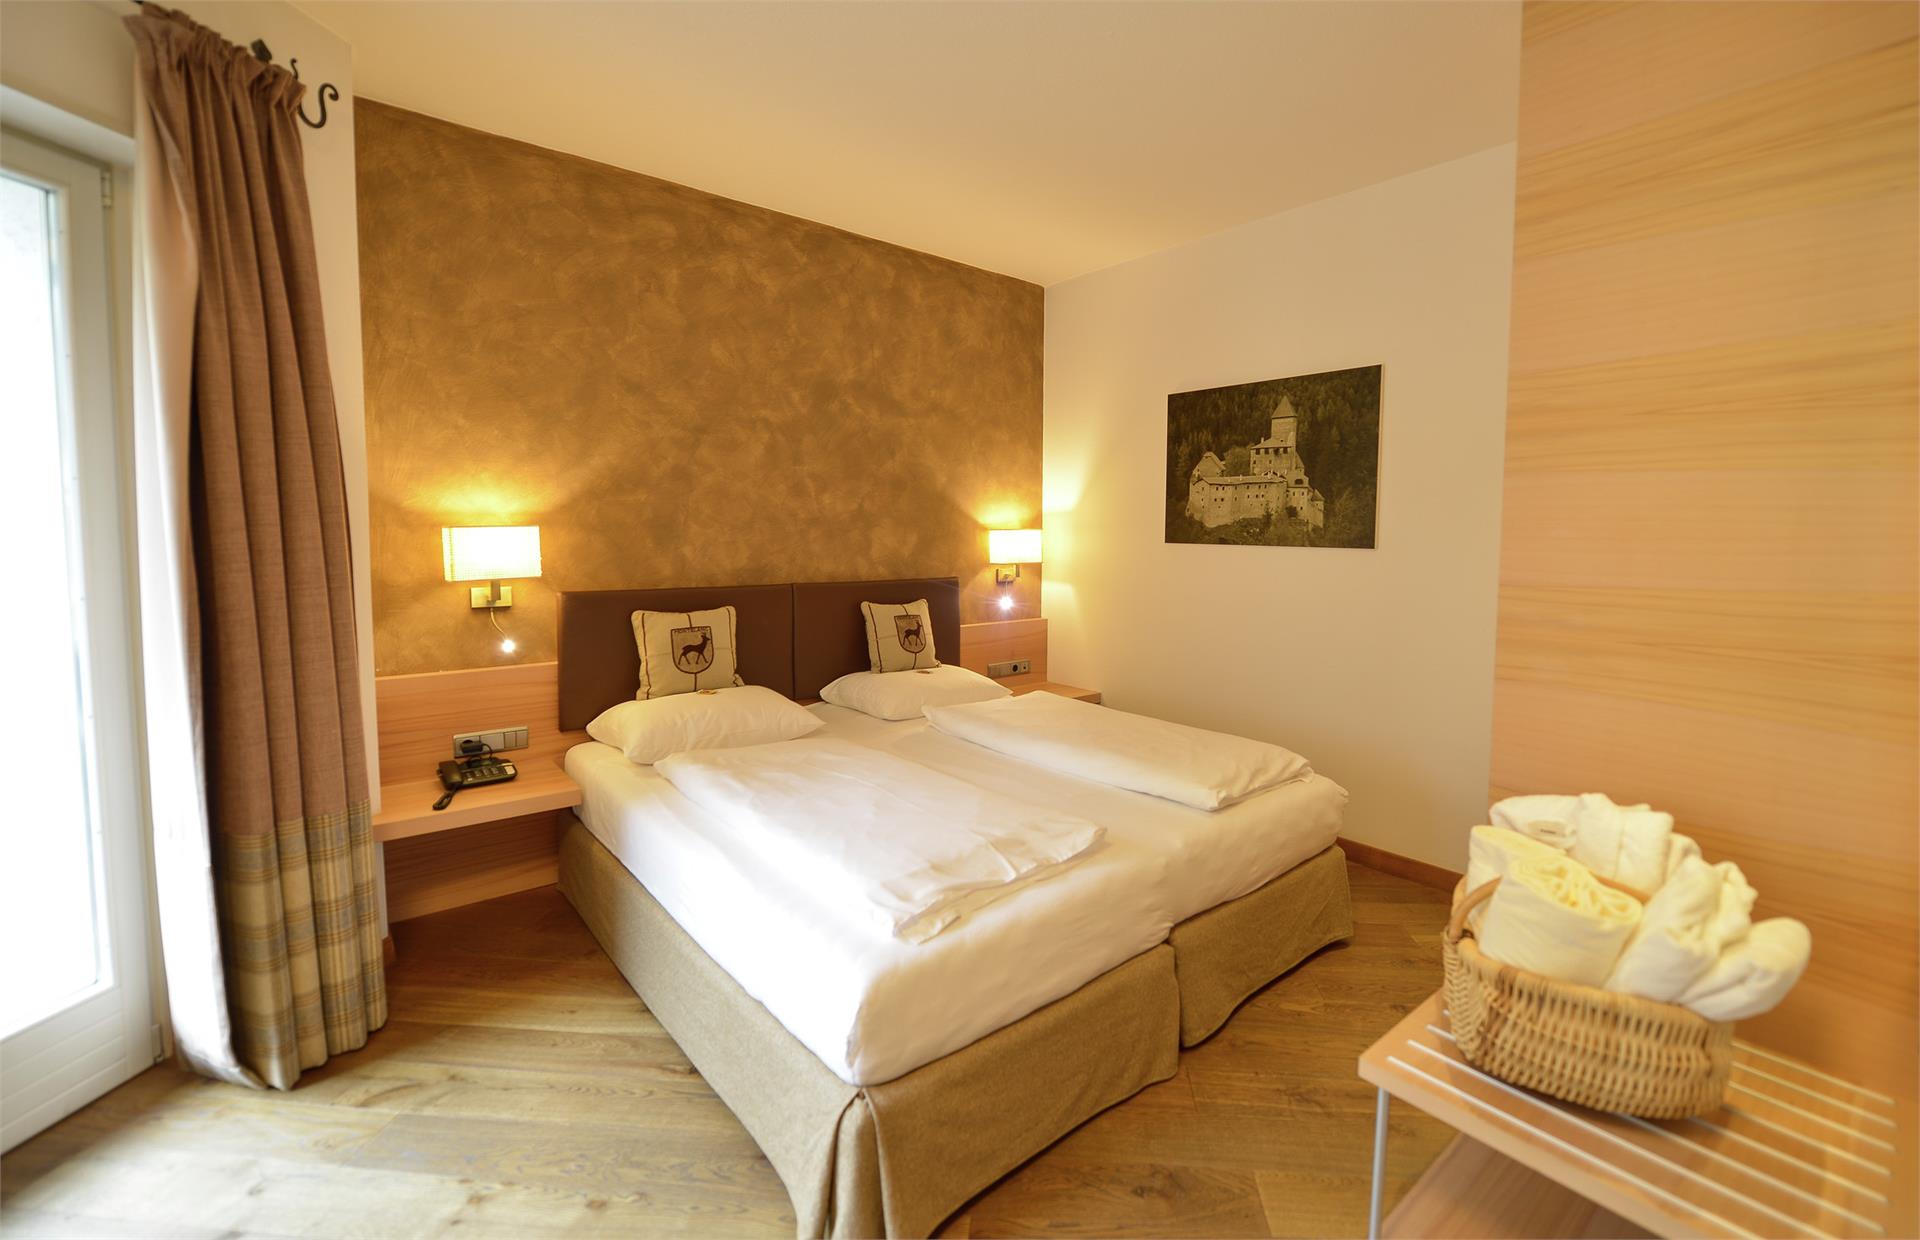 Residence Hotel Alpinum Sand in Taufers/Campo Tures 36 suedtirol.info